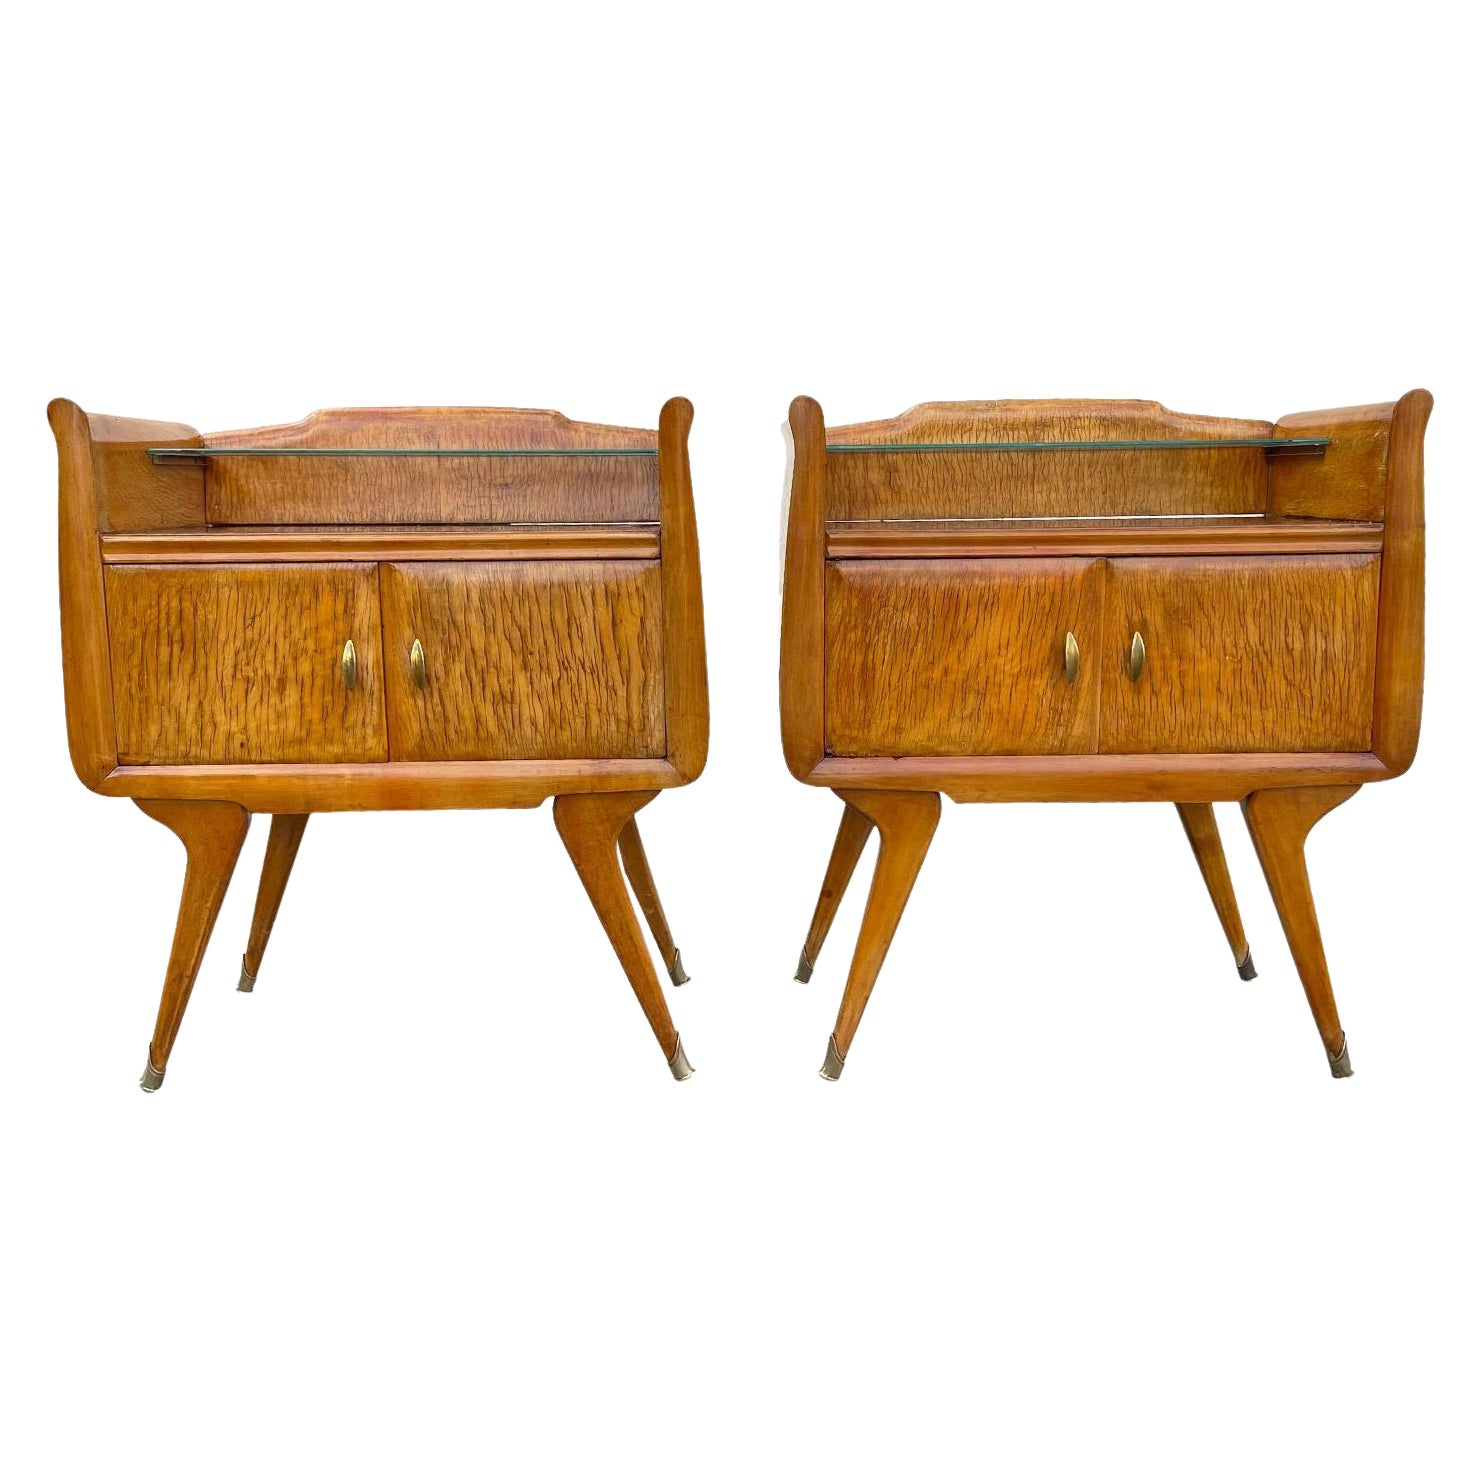 20th Century Italian Pair of Mid-Century Maplewood Nightstands by Paolo Buffa